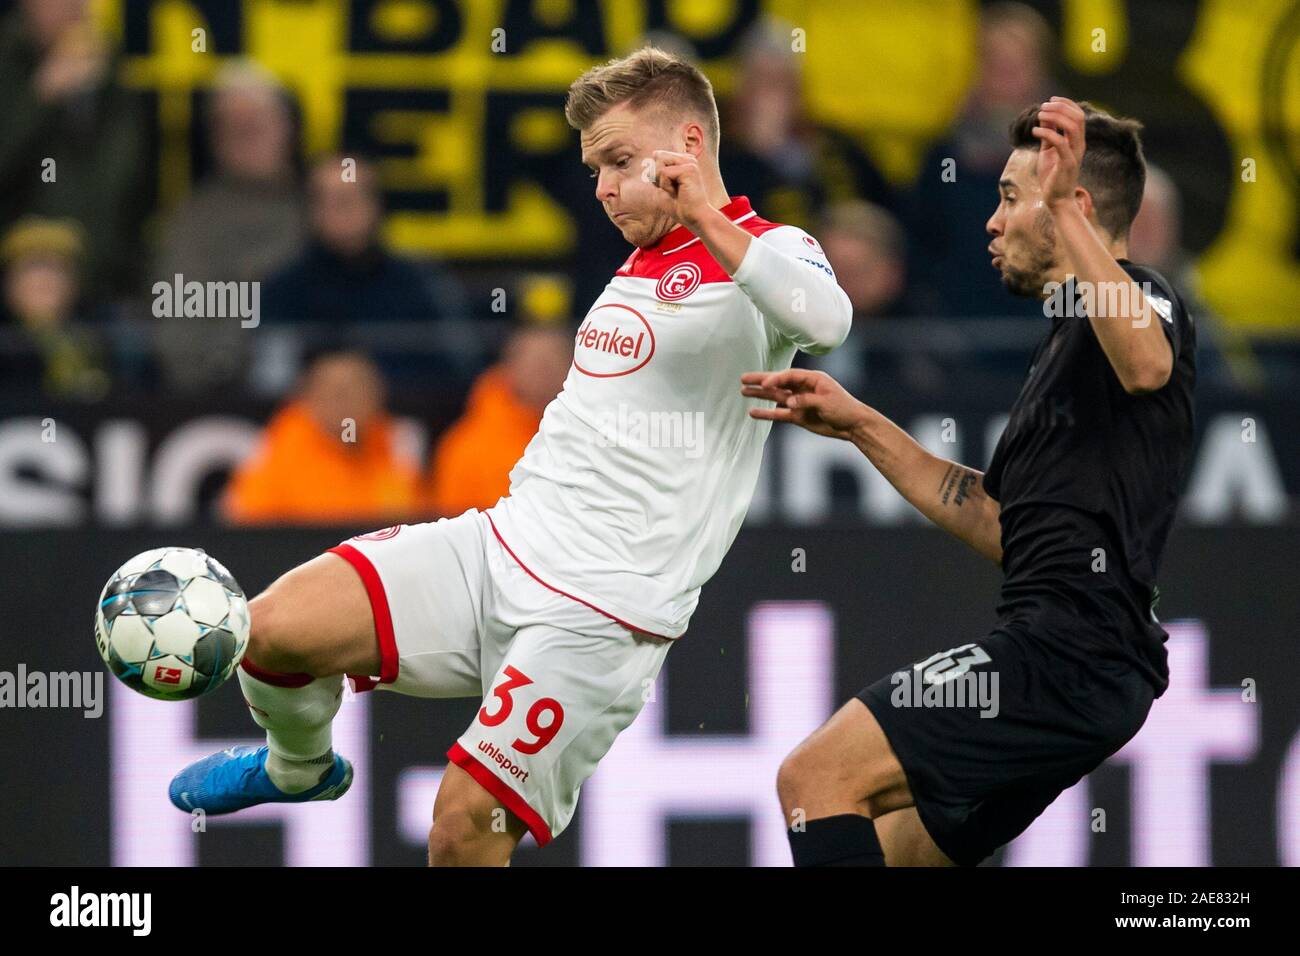 Dortmund, Germany. 07th Dec, 2019. Soccer: Bundesliga, Borussia Dortmund - Fortuna Düsseldorf, 14th matchday, at Signal-Iduna-Park. Düsseldorf's Jean Zimmer (l.) and Dortmund's Raphael Guerreiro fight for the ball. Credit: David Inderlied/dpa - IMPORTANT NOTE: In accordance with the requirements of the DFL Deutsche Fußball Liga or the DFB Deutscher Fußball-Bund, it is prohibited to use or have used photographs taken in the stadium and/or the match in the form of sequence images and/or video-like photo sequences./dpa/Alamy Live News Stock Photo